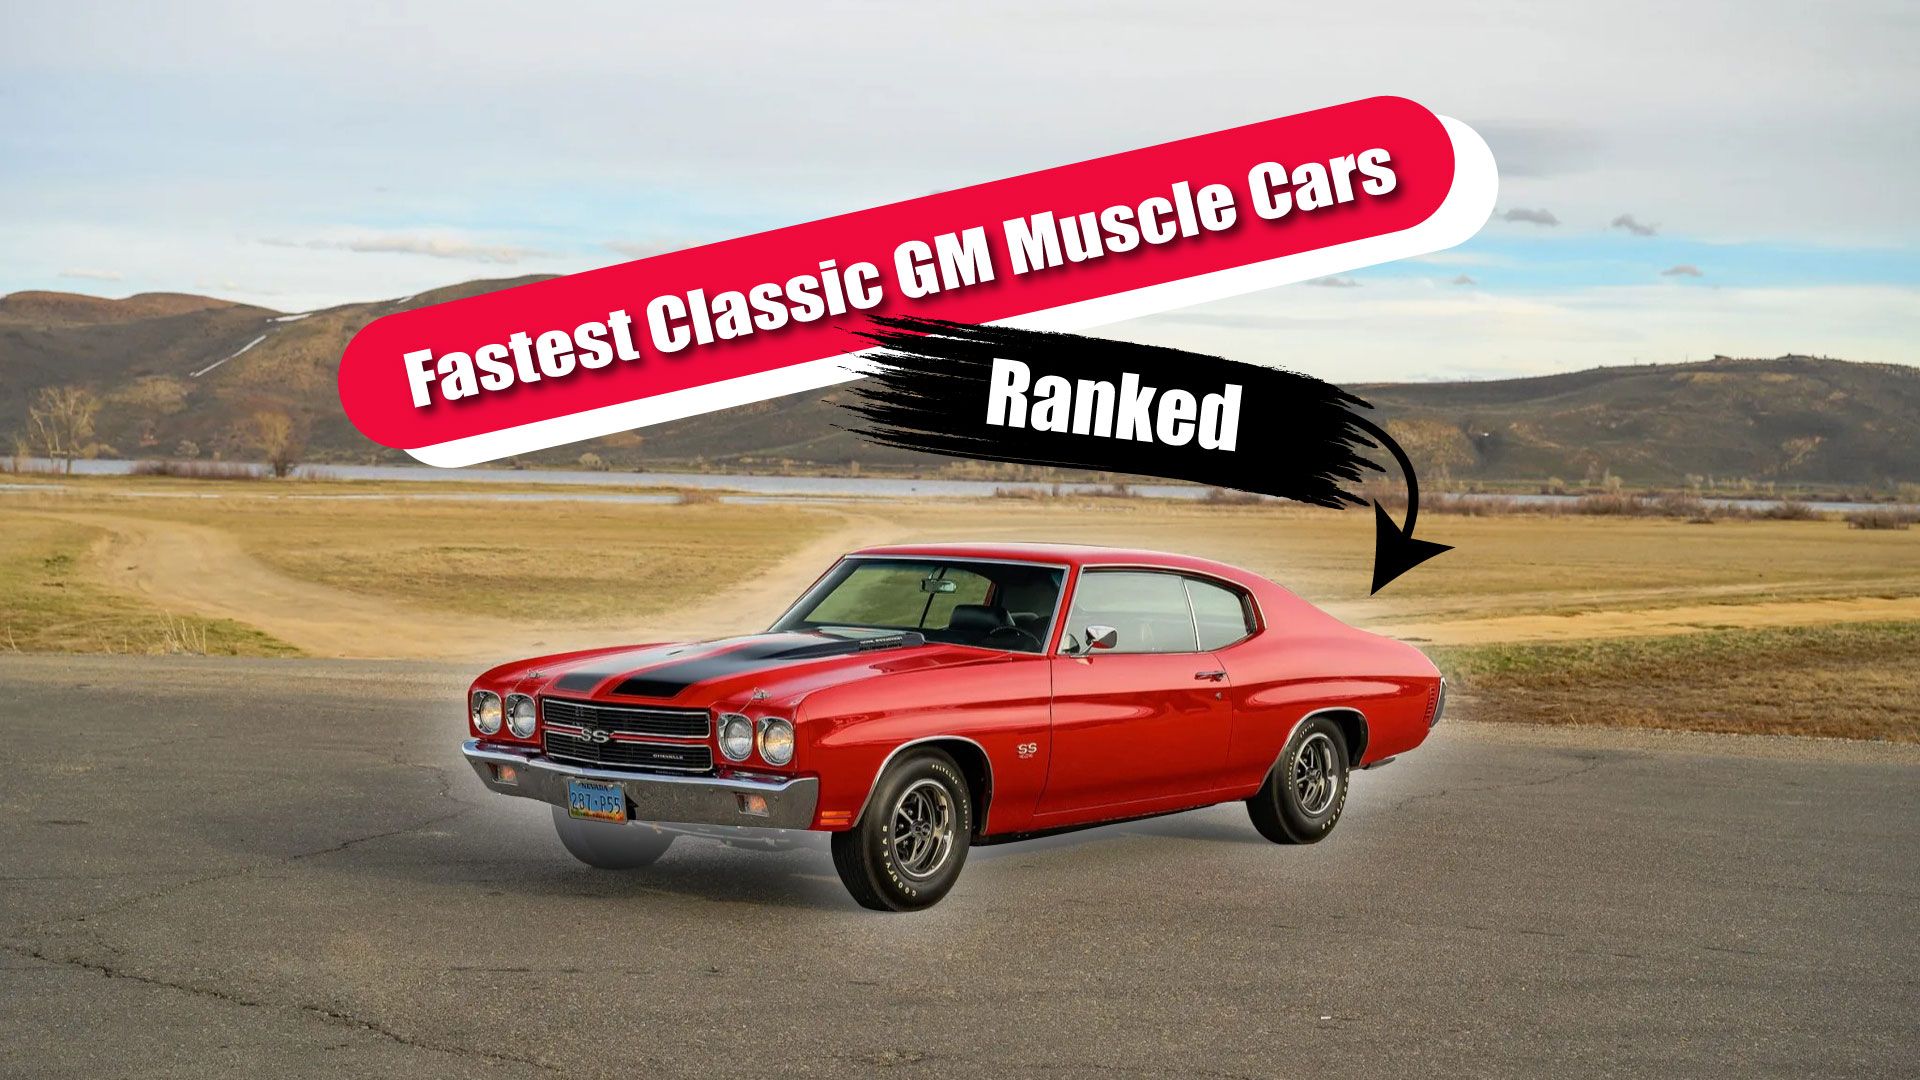 1970 Chevrolet Chevelle SS 454 Featured Image